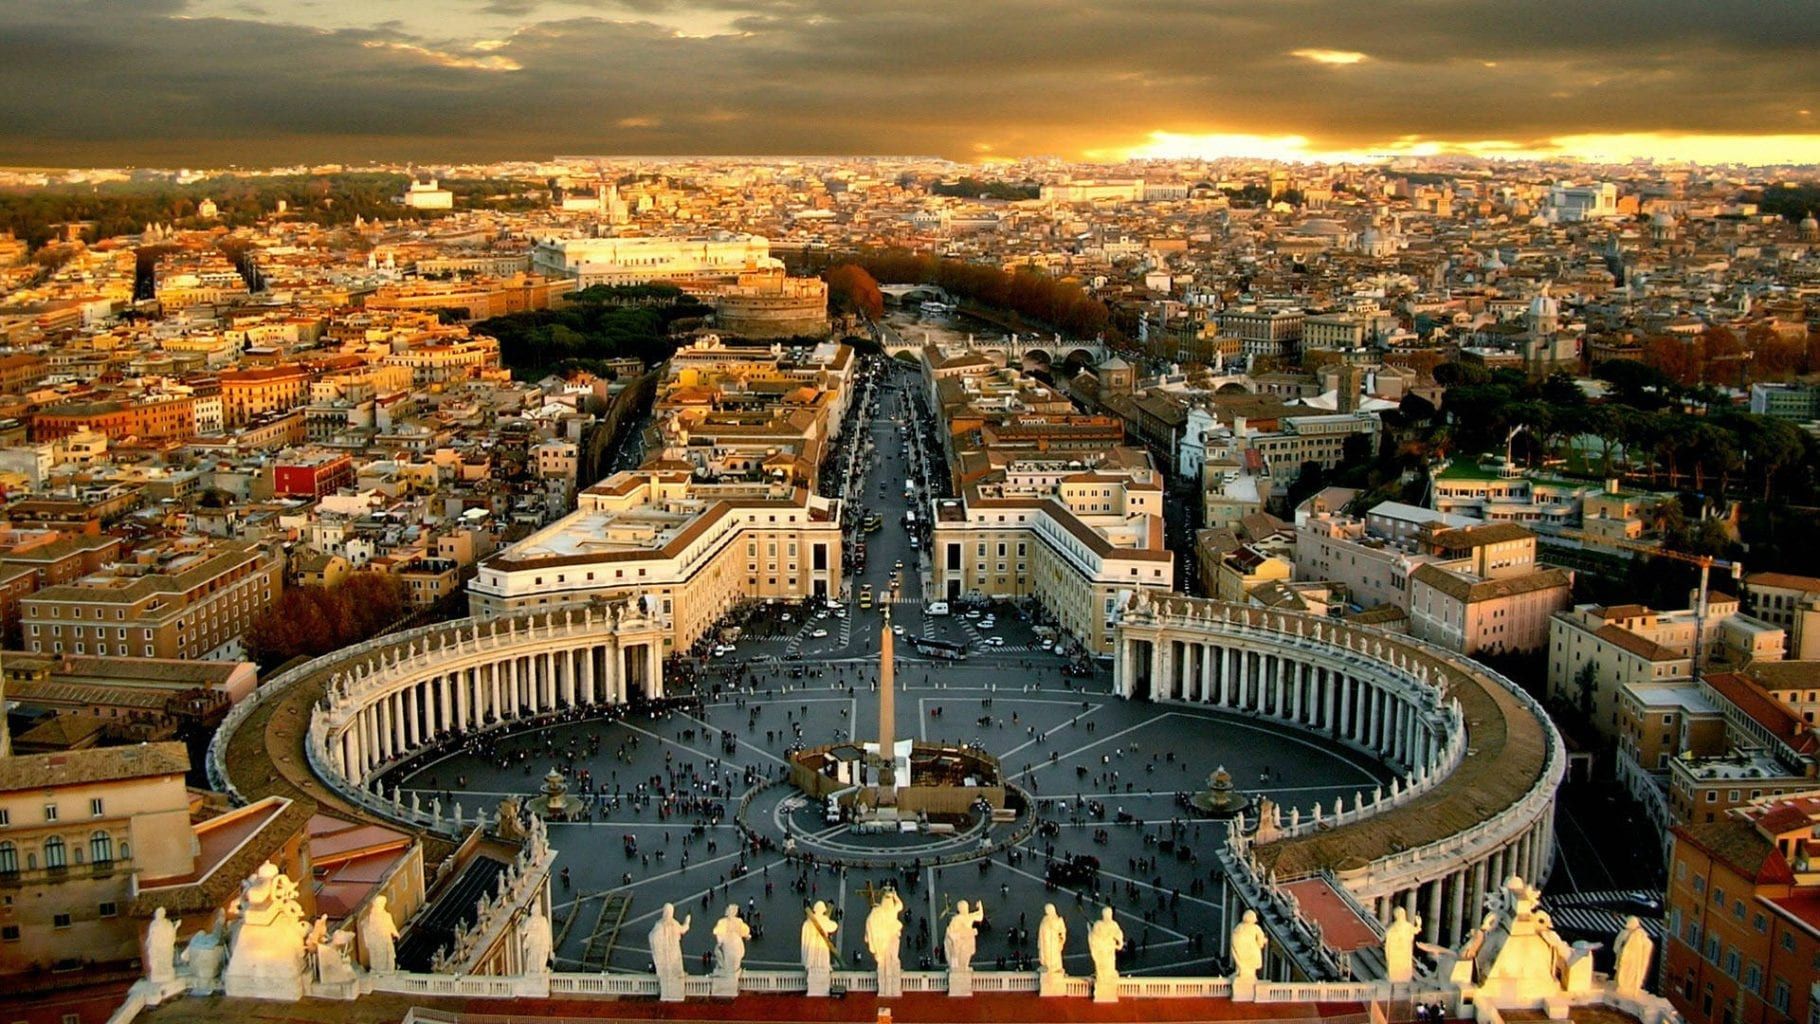 St. Peters Square The Vatican